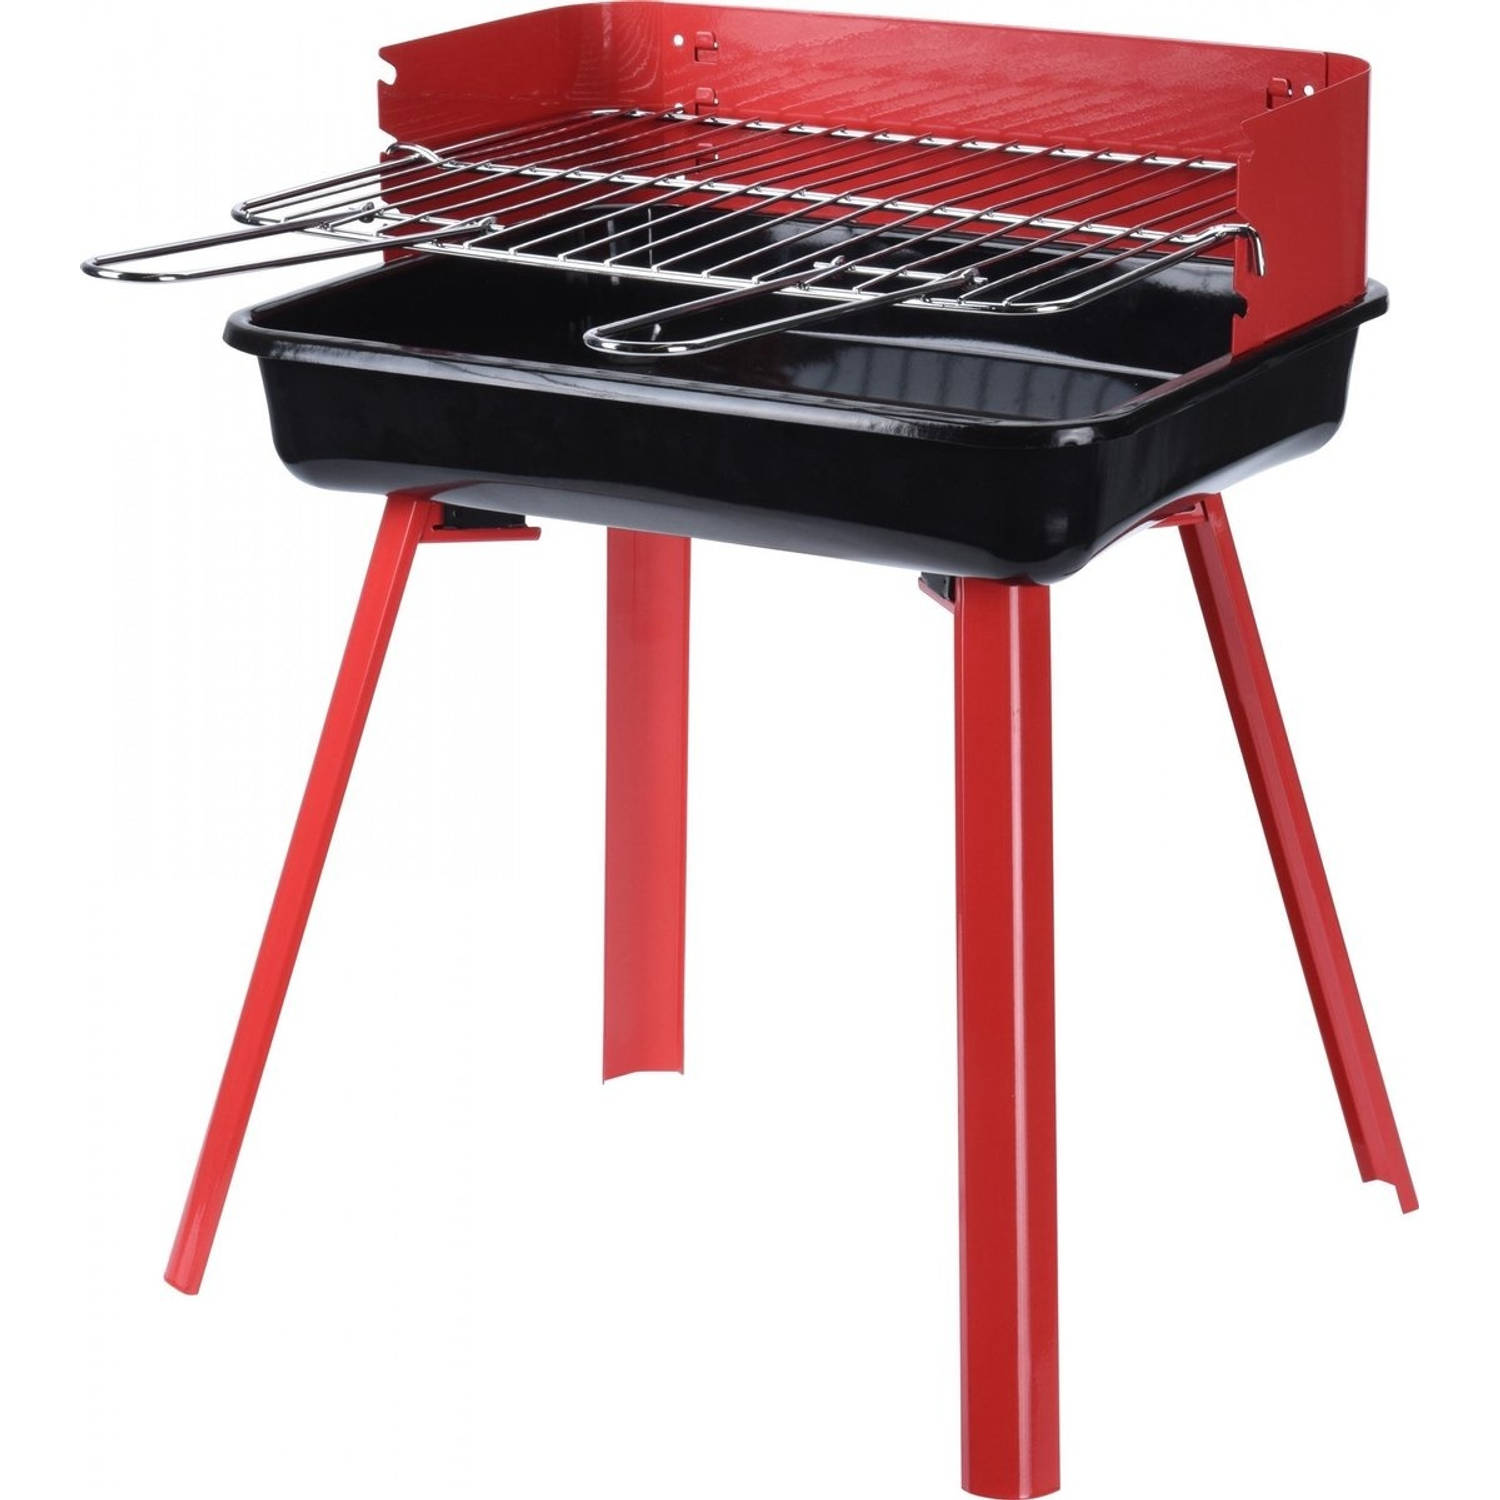 Bbq Houtskoolbarbecue - Grilloppervlak 33 X 26 Cm - Rood - Compact